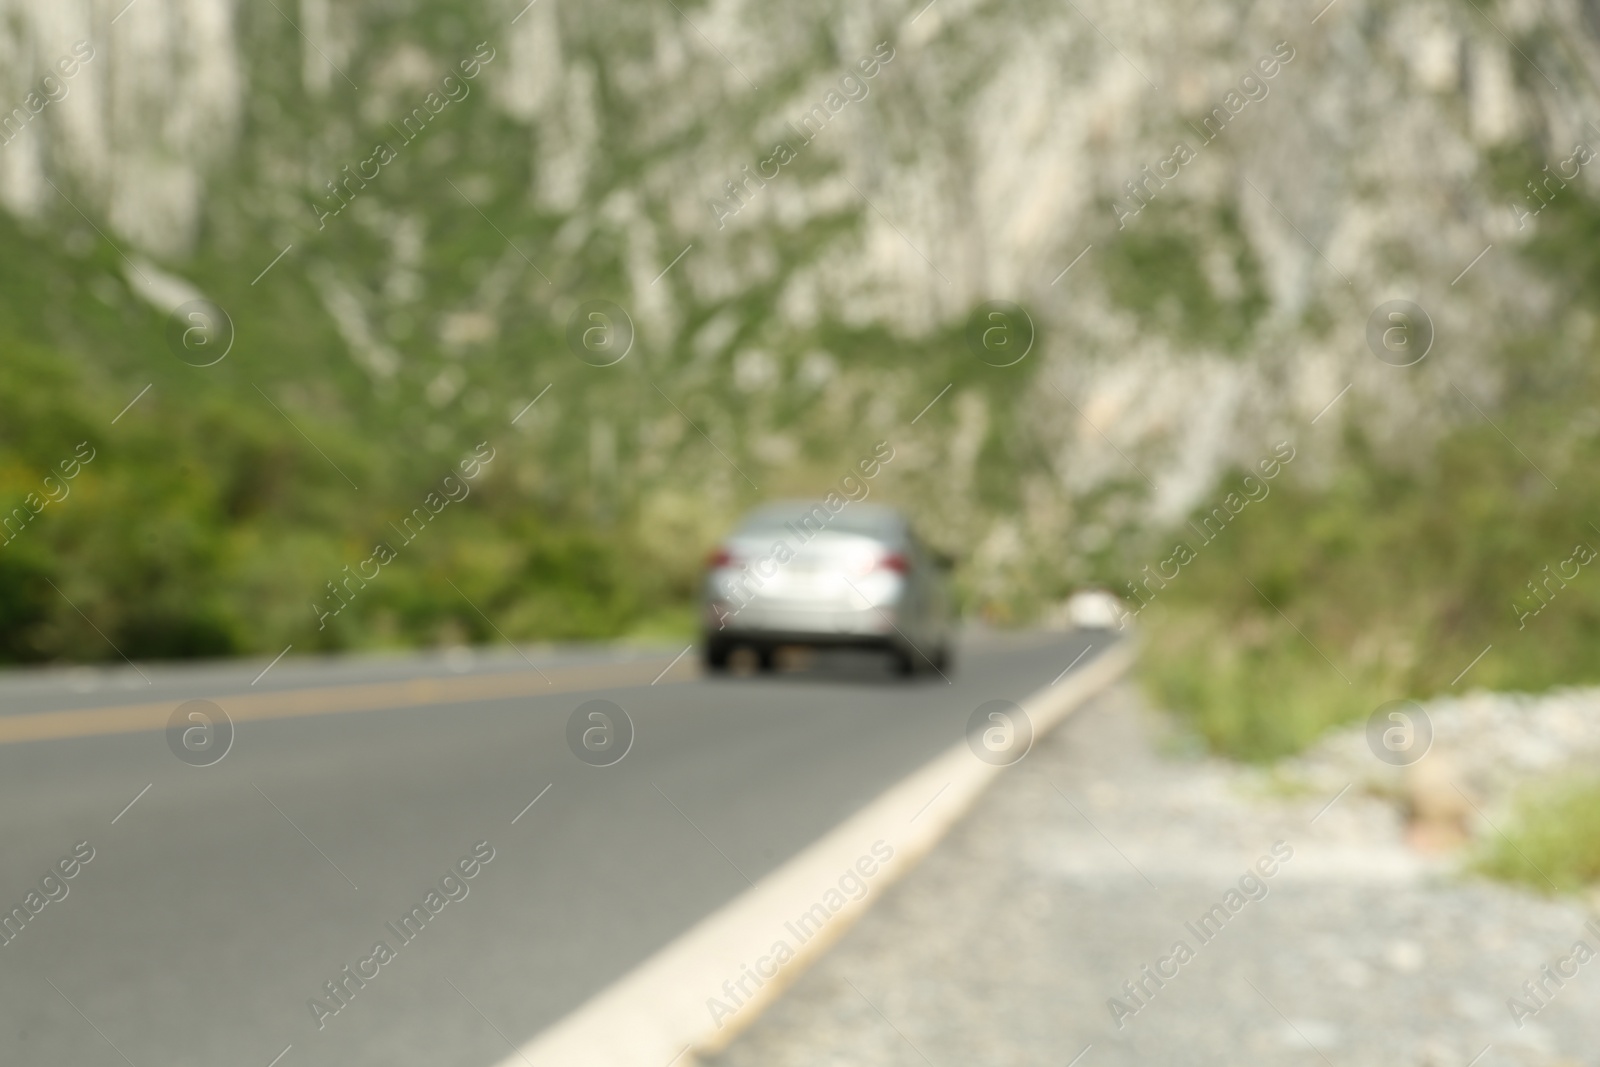 Photo of Big mountains and trees near road with white car, blurred view